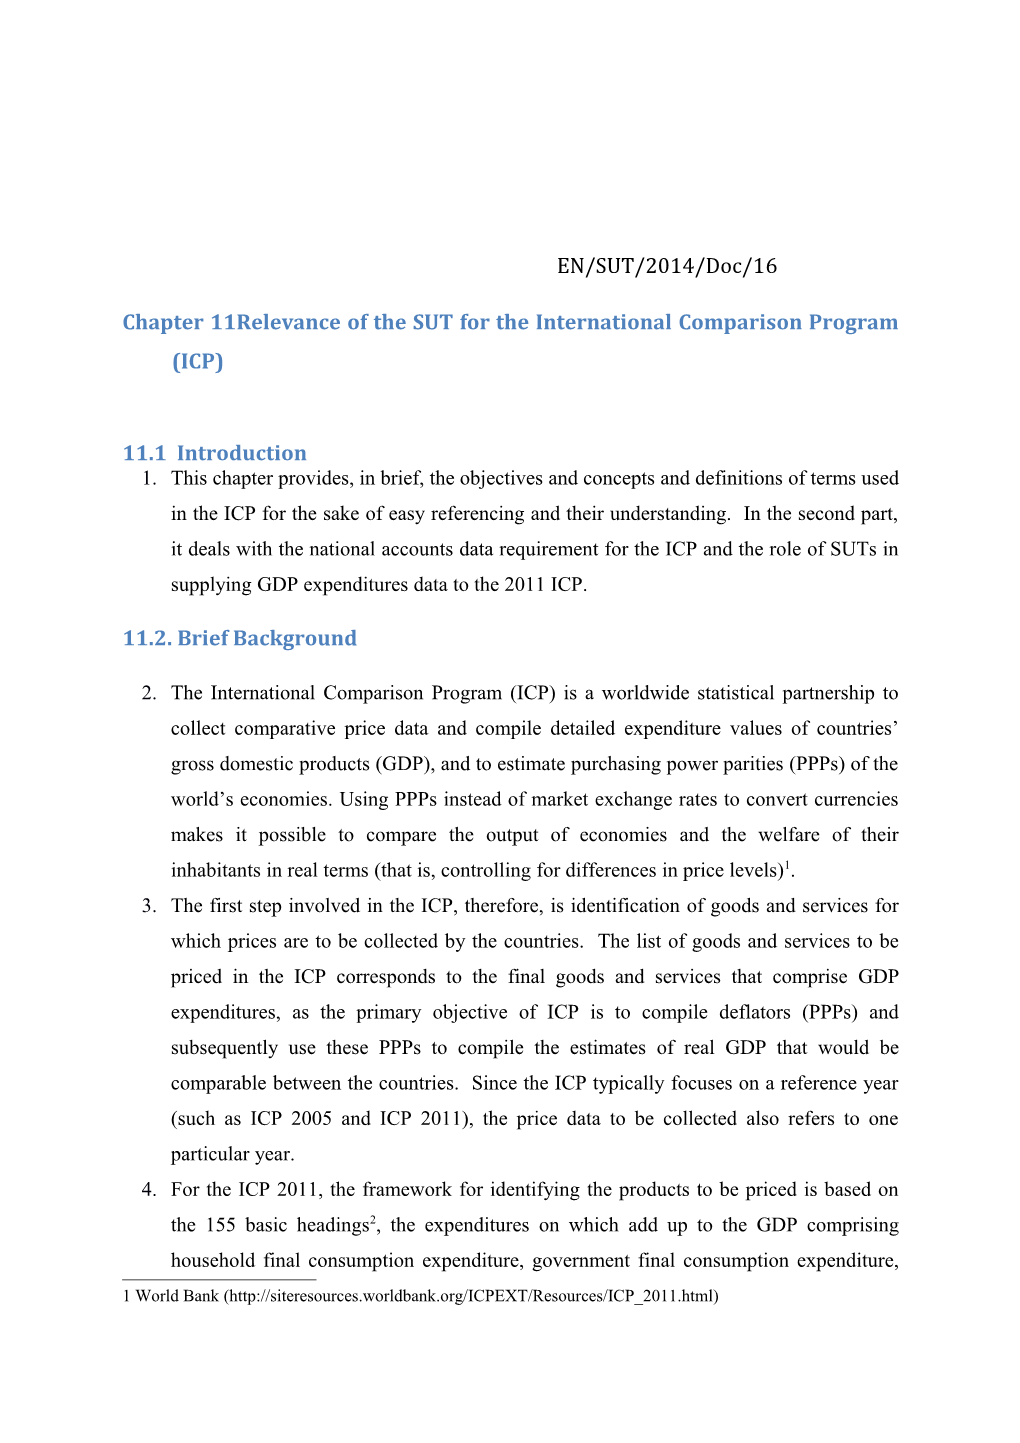 Chapter 11Relevance of the SUT for the International Comparison Program (ICP)